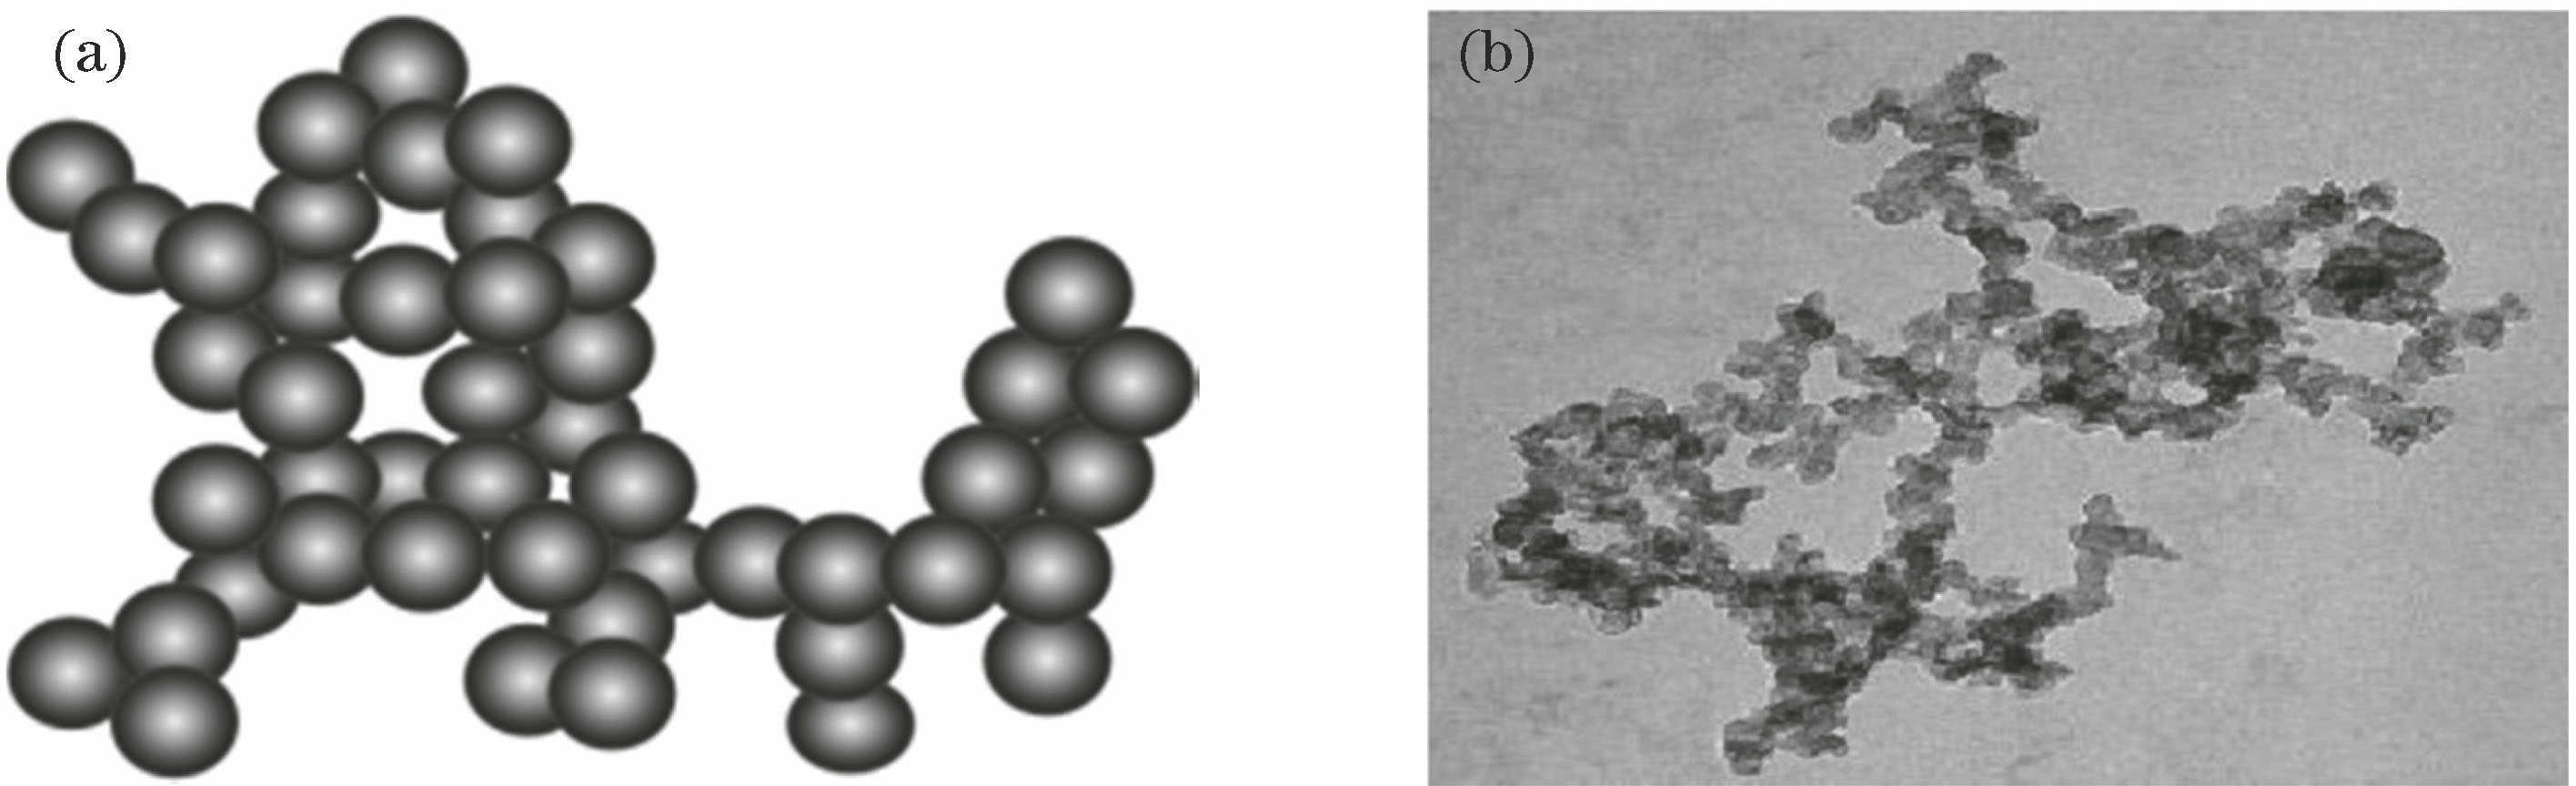 Particle aggregation of soot. (a) Soot cluster model based on CCA simulation; (b) soot morphology under microscope